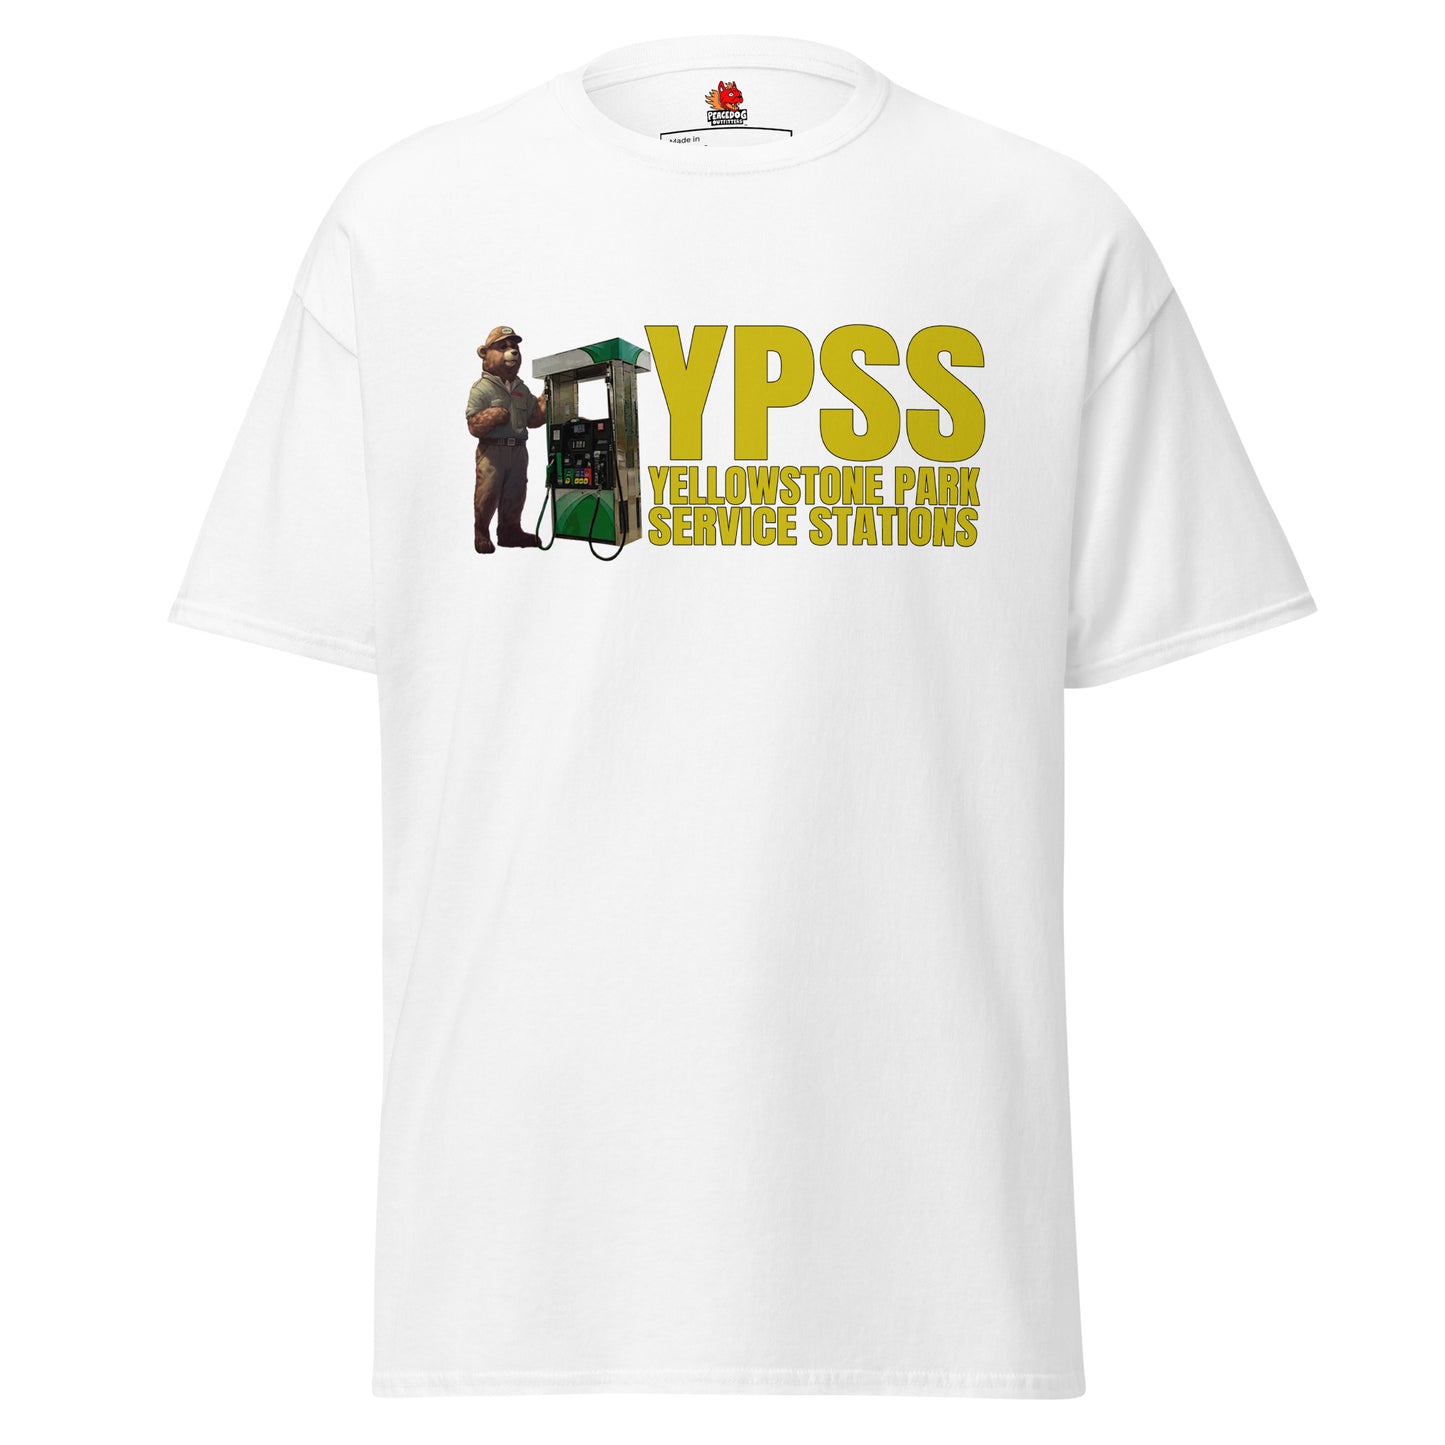 YPSS Yellowstone Park Service Stations Bear Front Print only Classic Tee